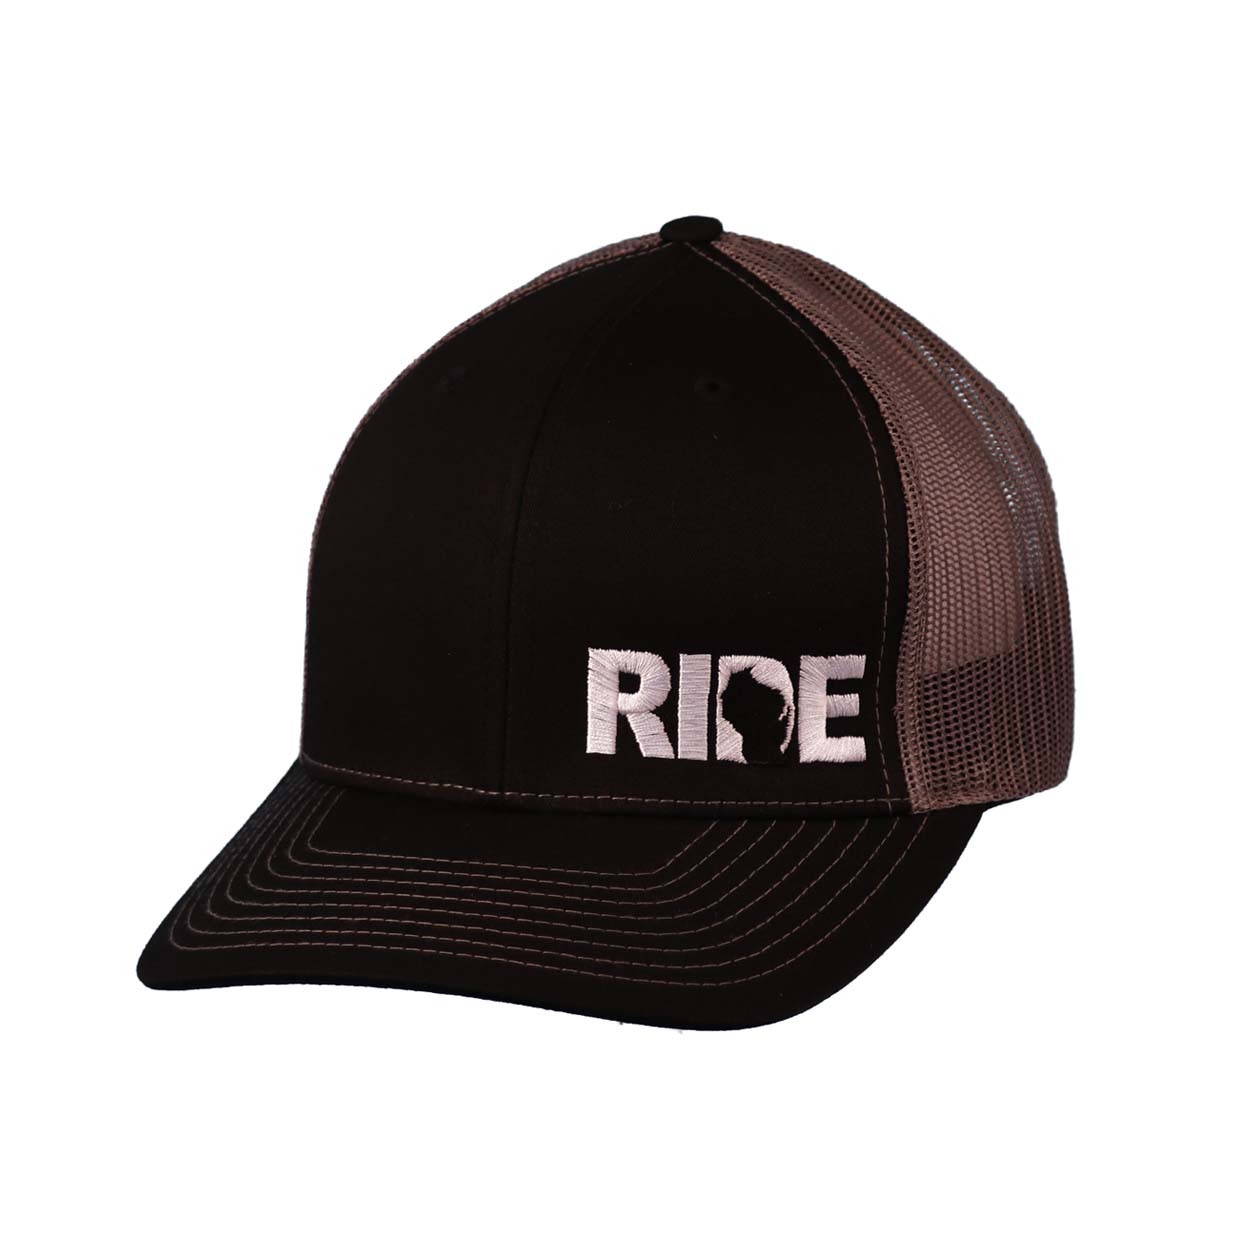 Ride Wisconsin Night Out Embroidered Snapback Trucker Hat Black/Gray